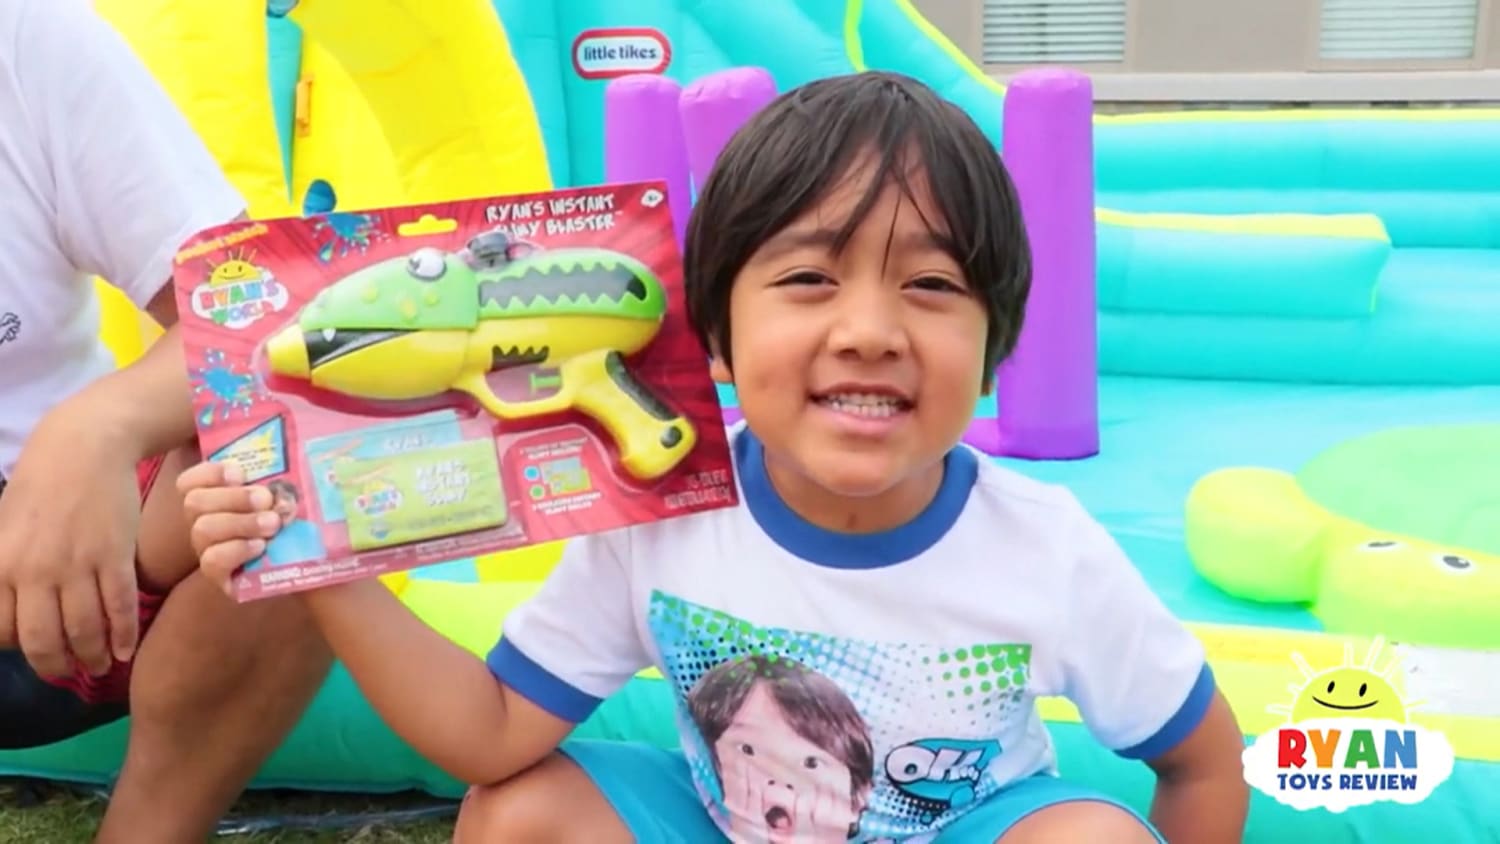 ryan's toy review website